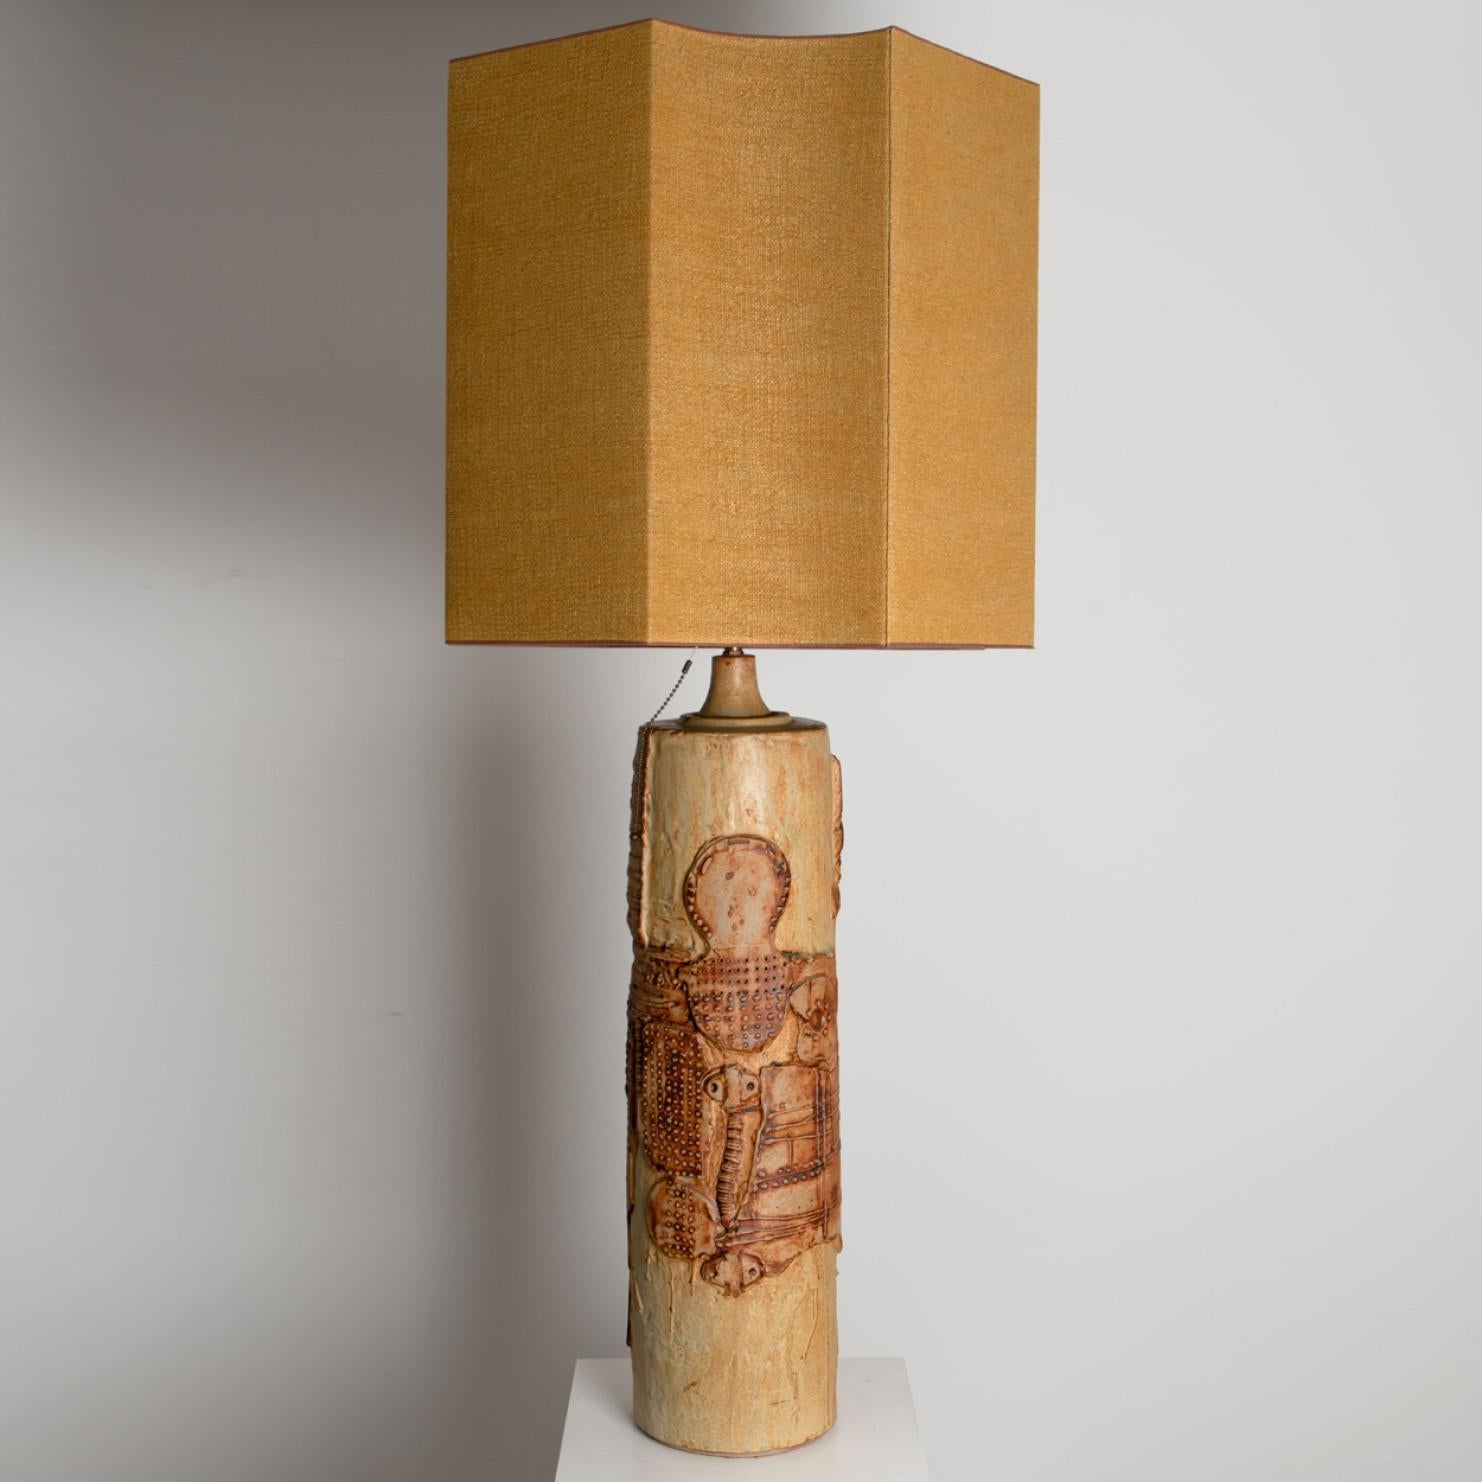 Large B. Rooke Ceramic Lamp, 1960s with Custom Made Silk Lampshade by René Hoube For Sale 3